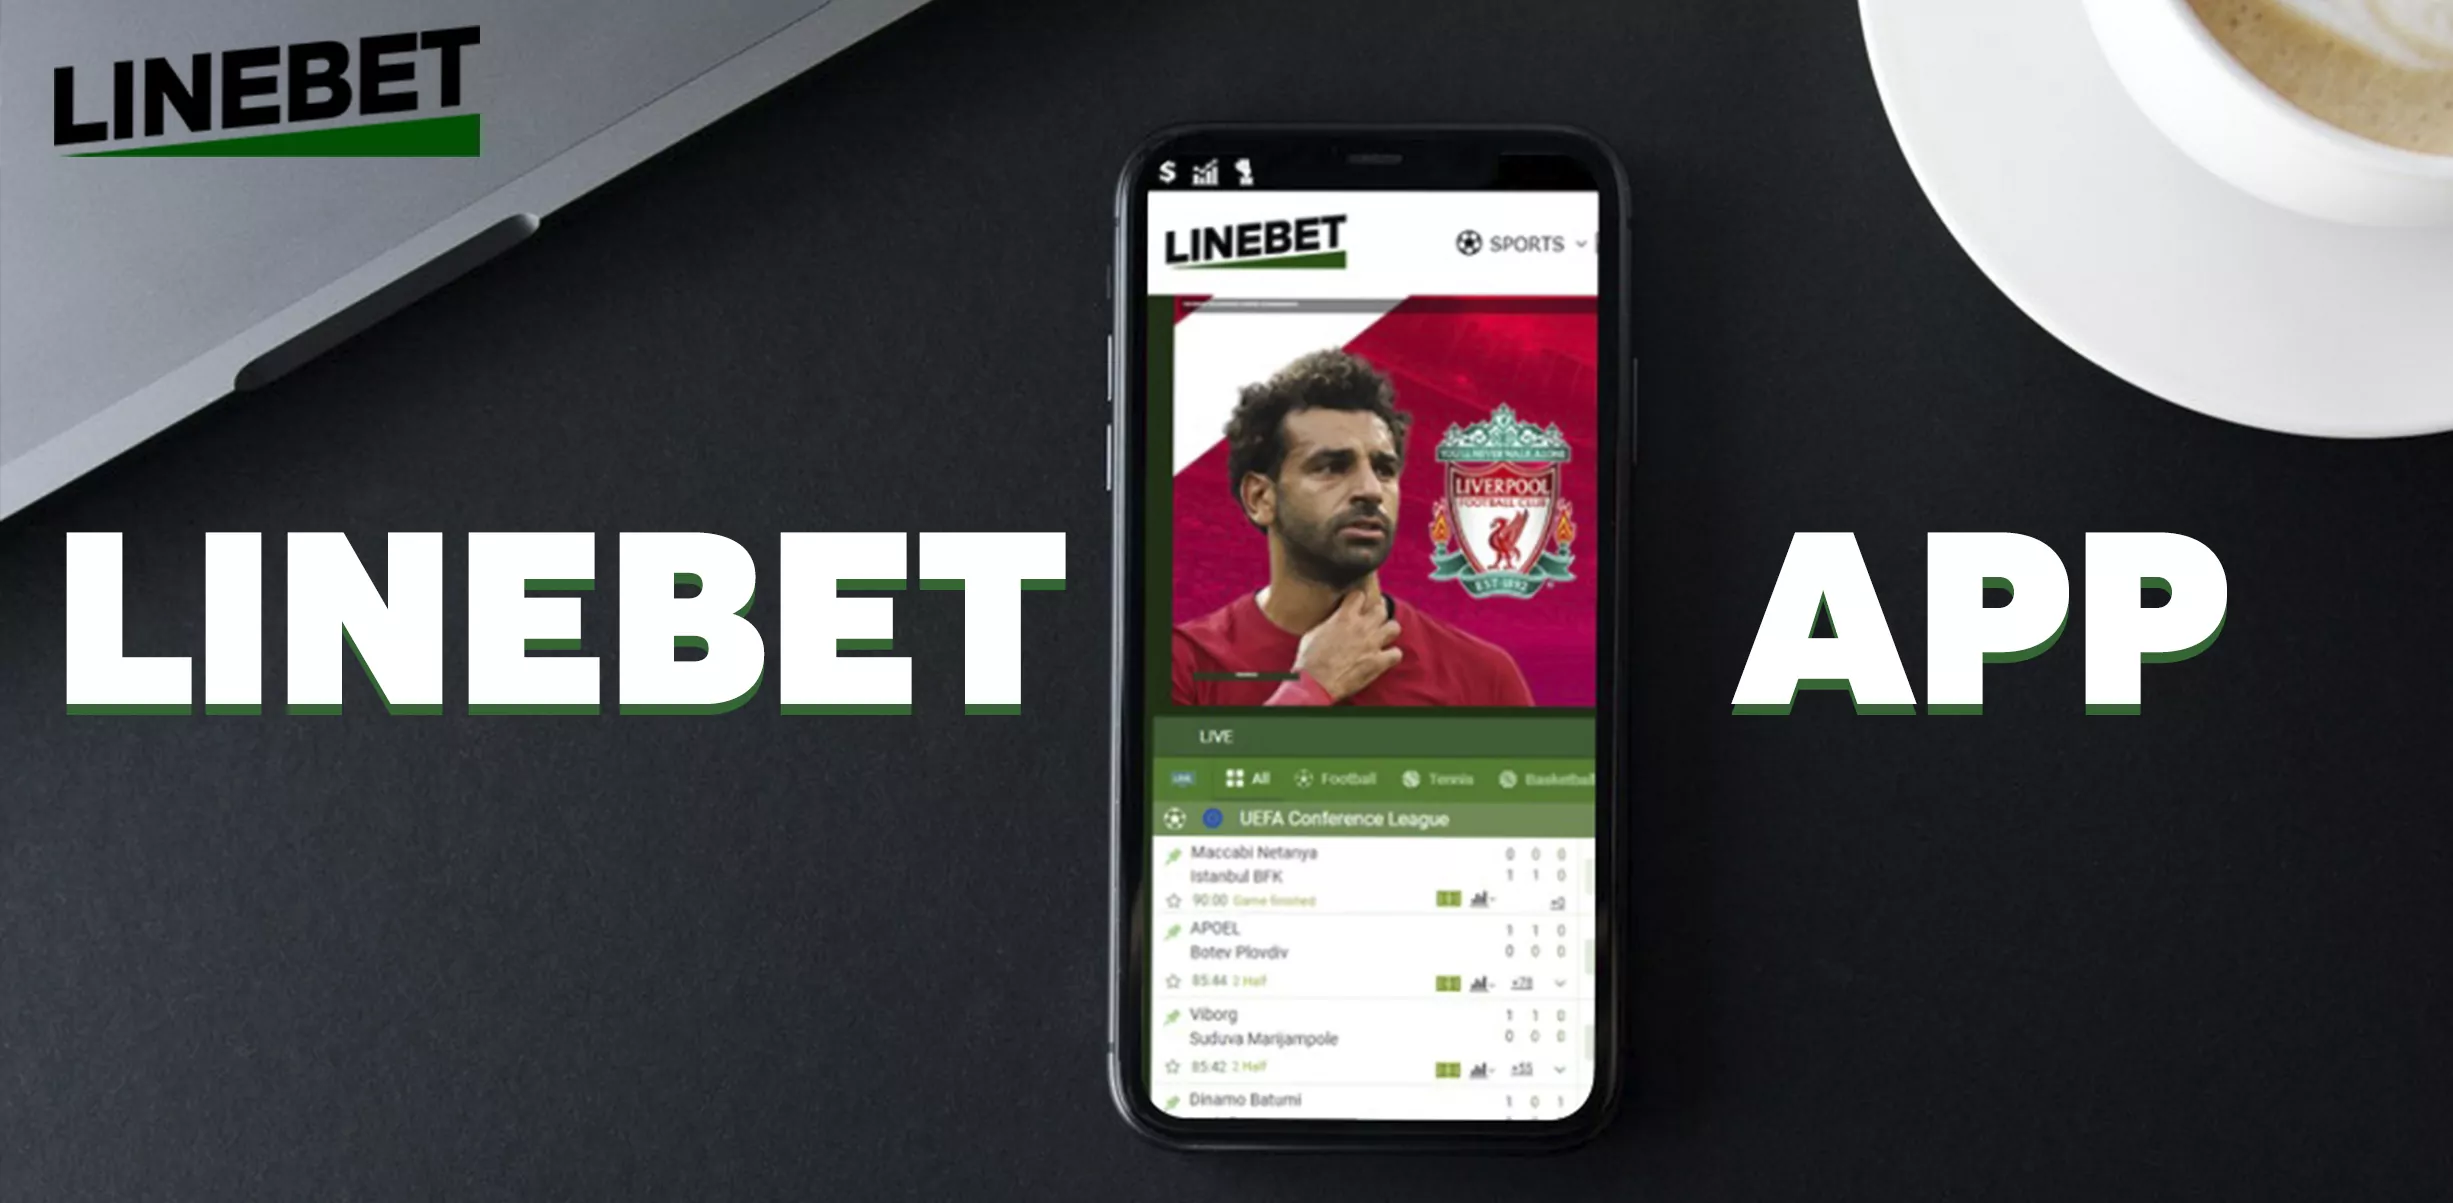 linebet app download for android and ios for Bangladesh users